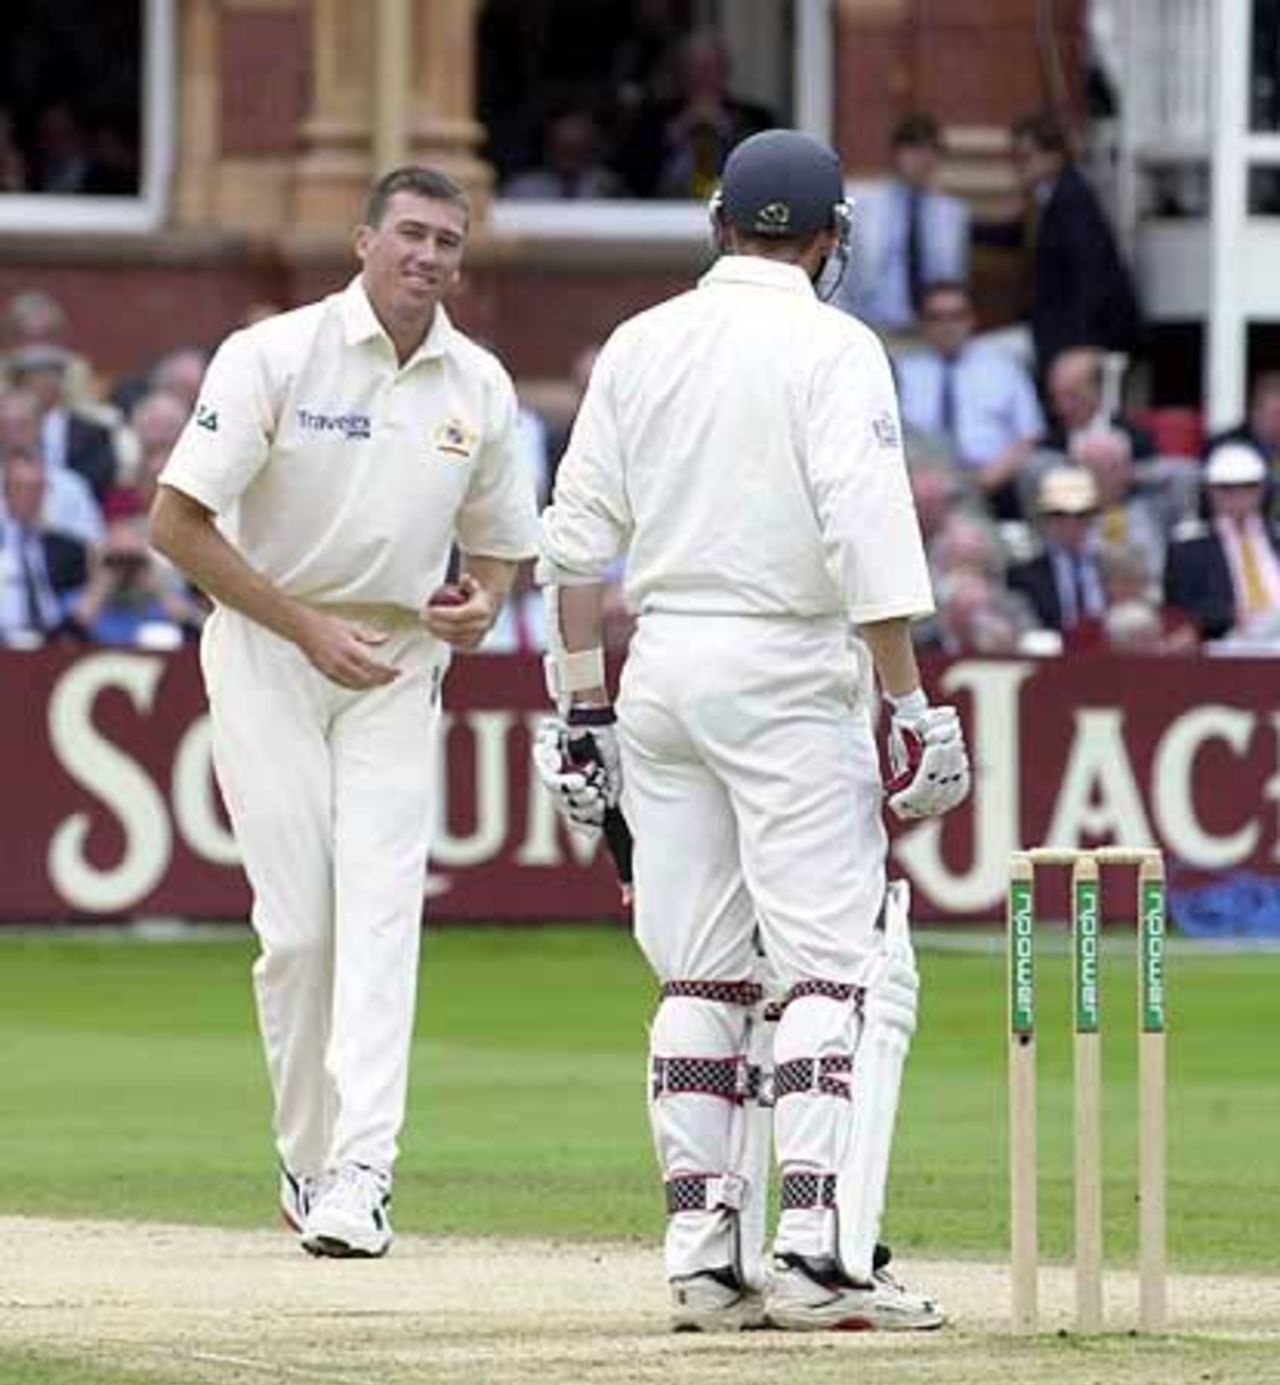 McGrath exchanges pleasantries with Mike Atherton, England v Australia, The Ashes 2nd npower Test, Lords, 19-23 July 2001